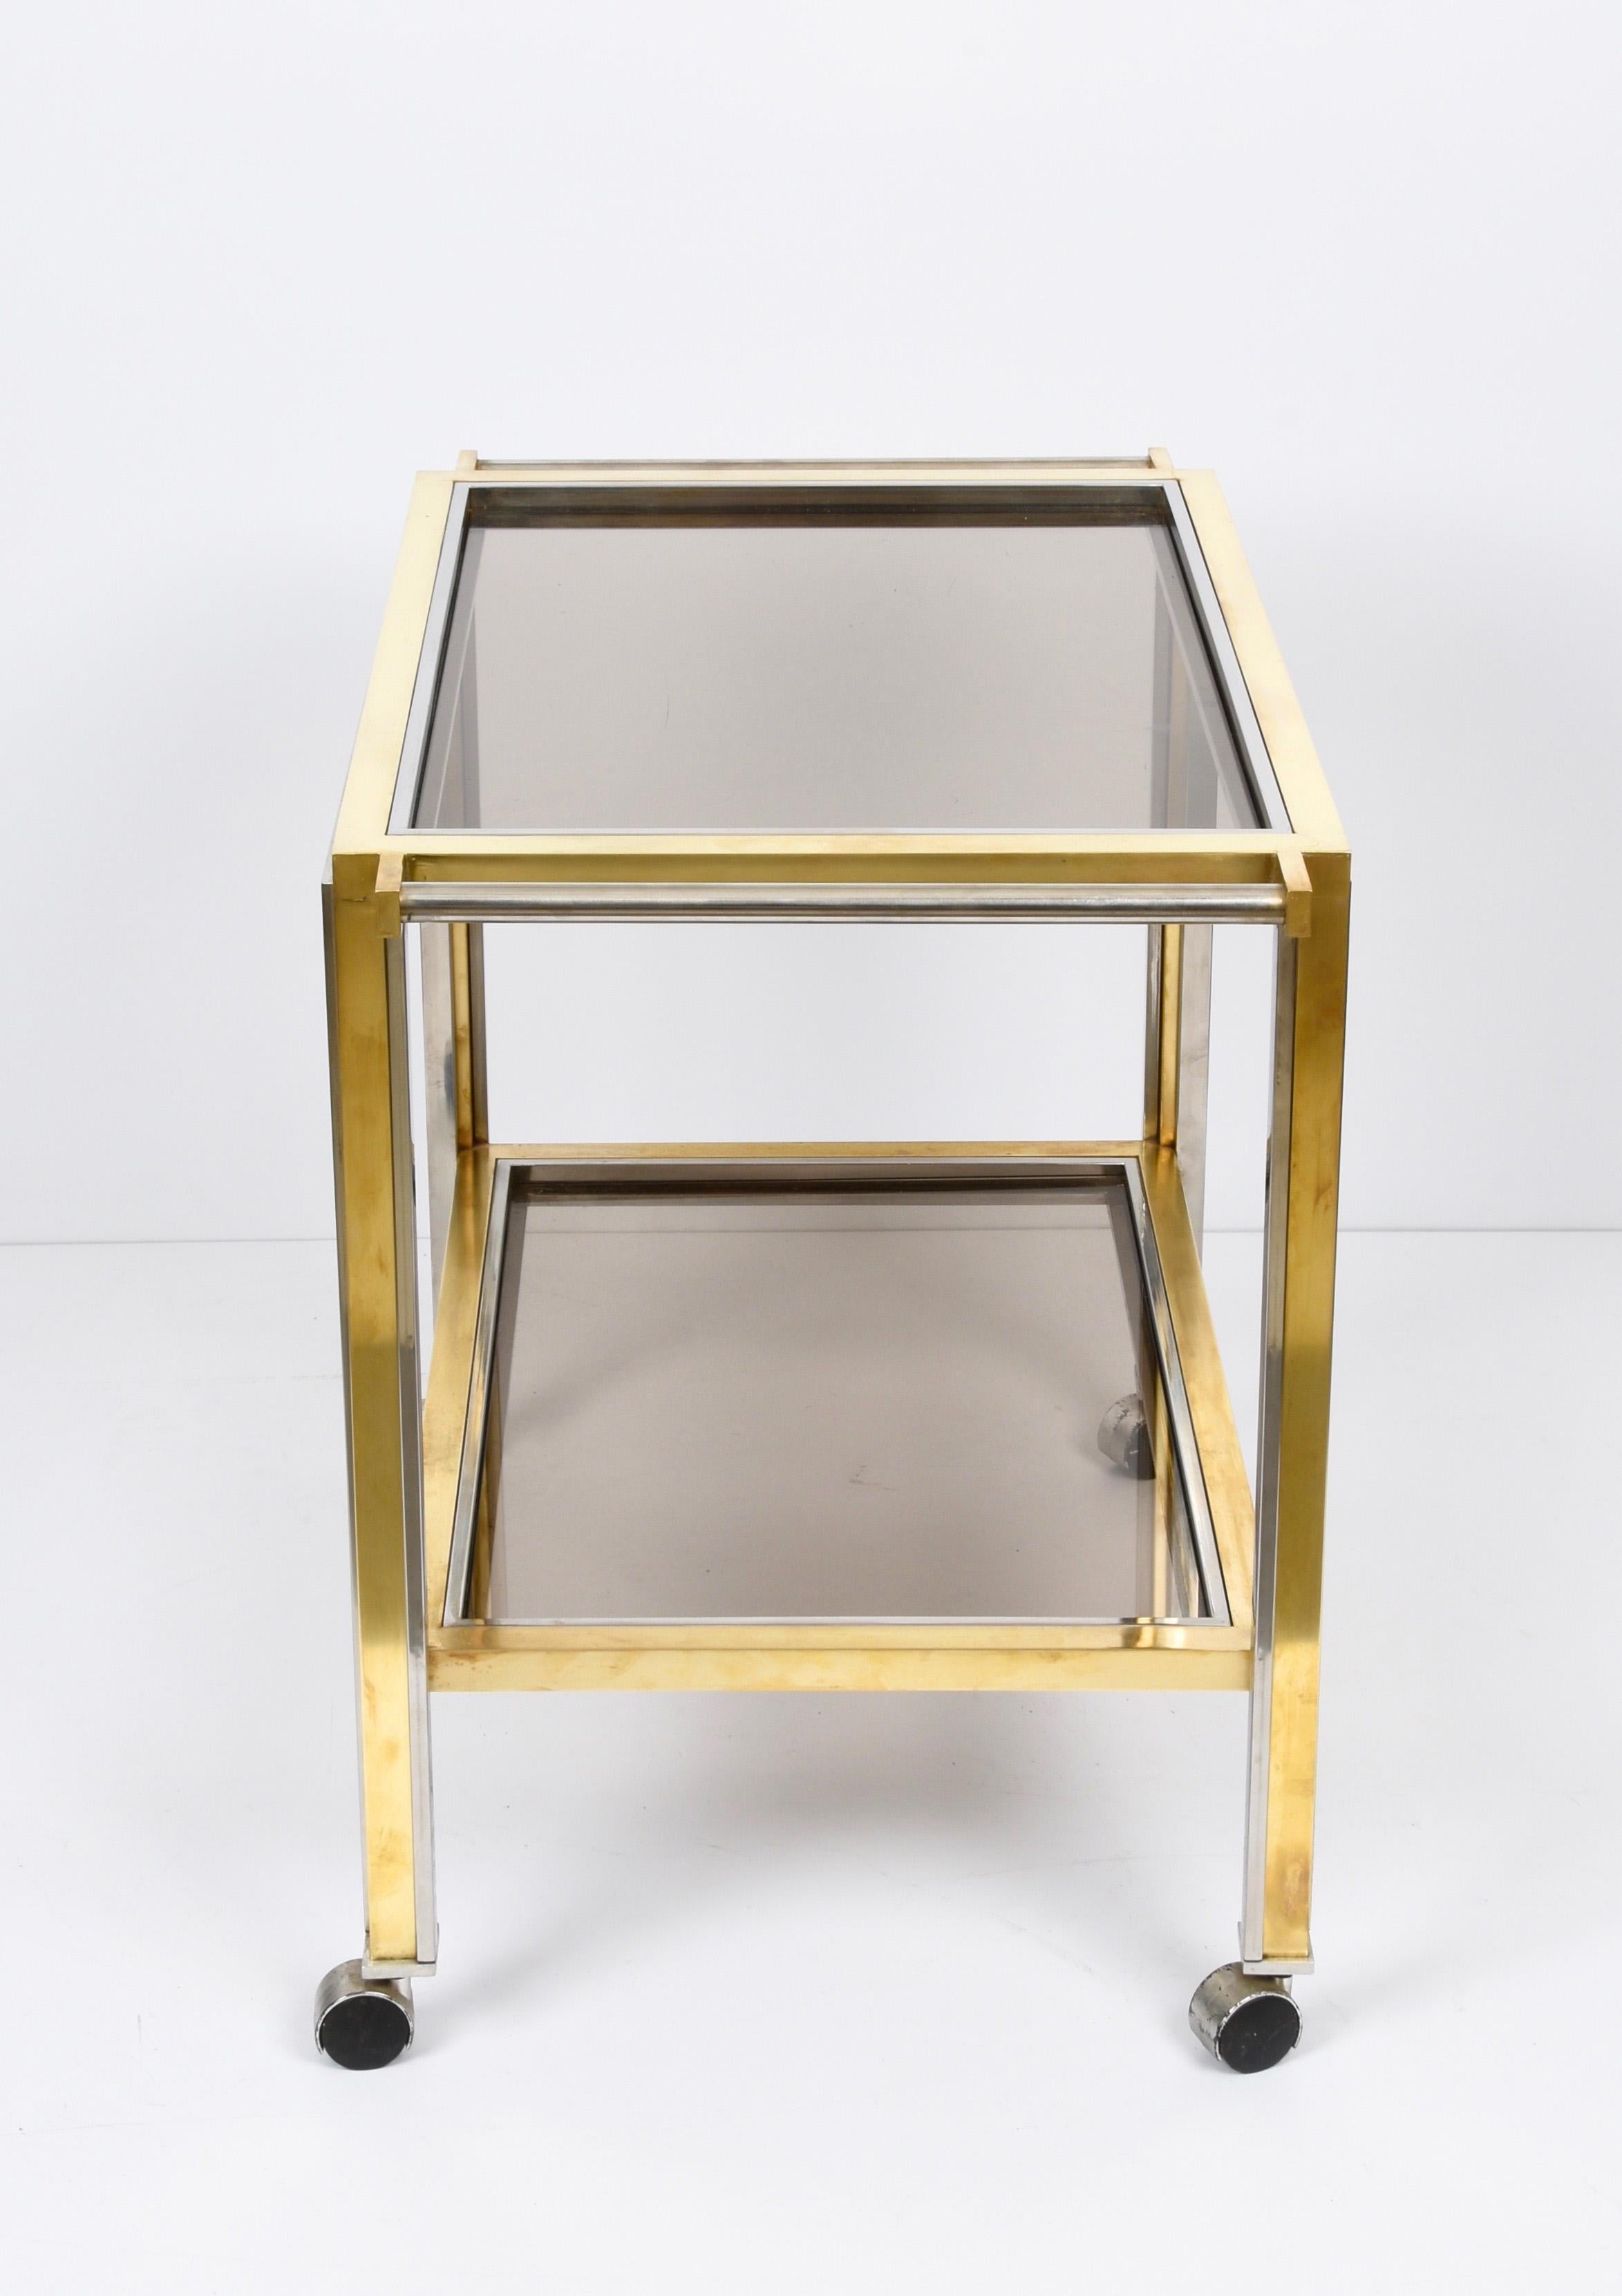 20th Century Rega Style Midcentury Brass and Chrome Italian Bar Cart with Glass Shelves 1970s For Sale